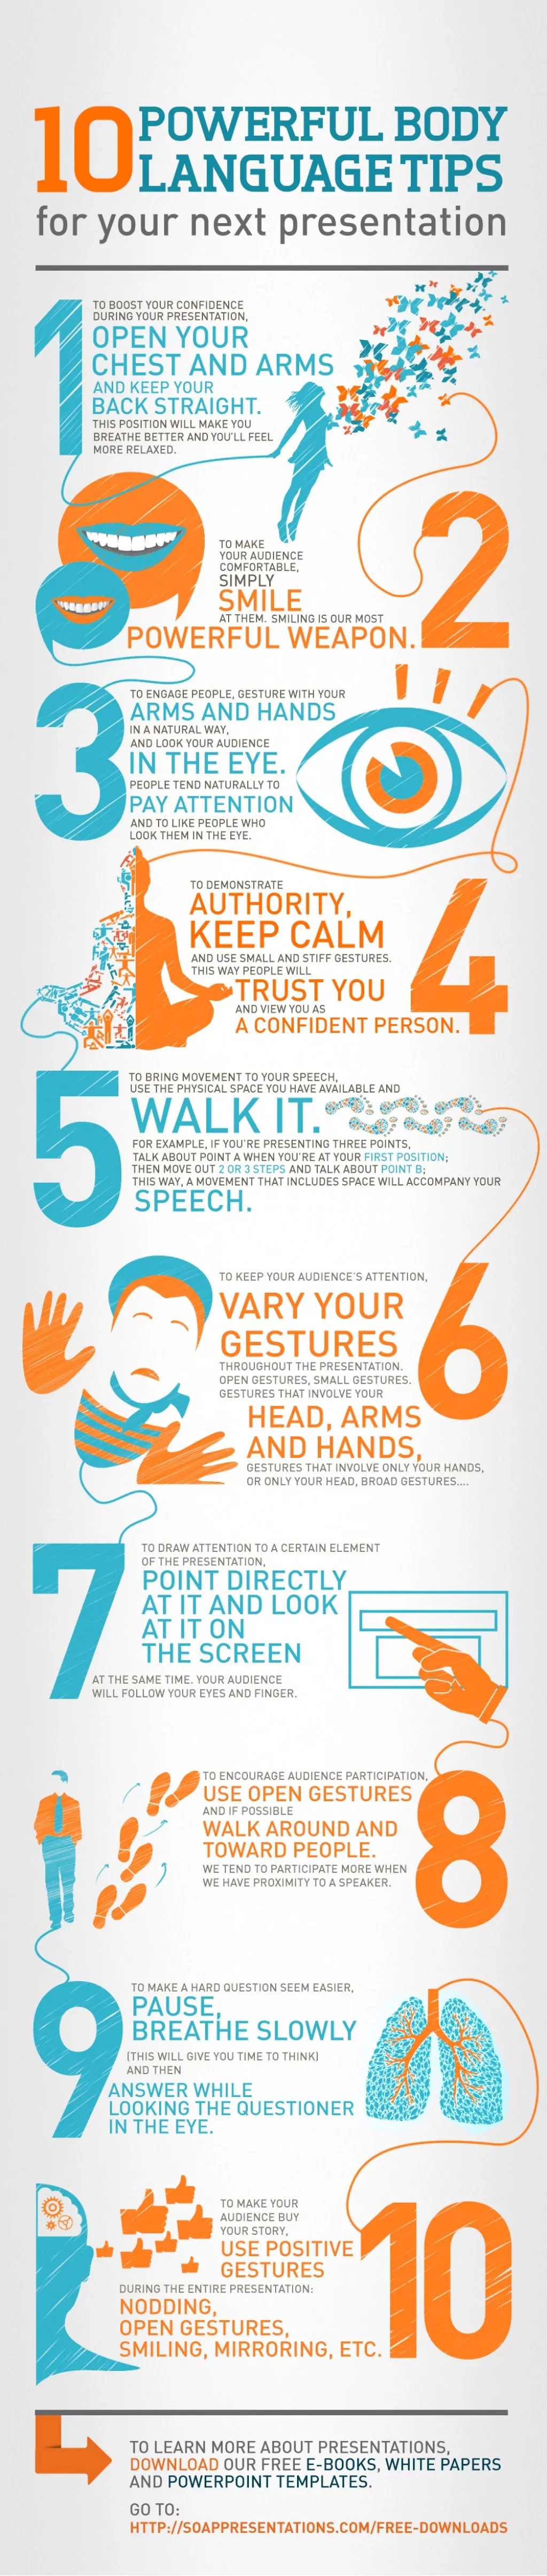 body language tips for presentations